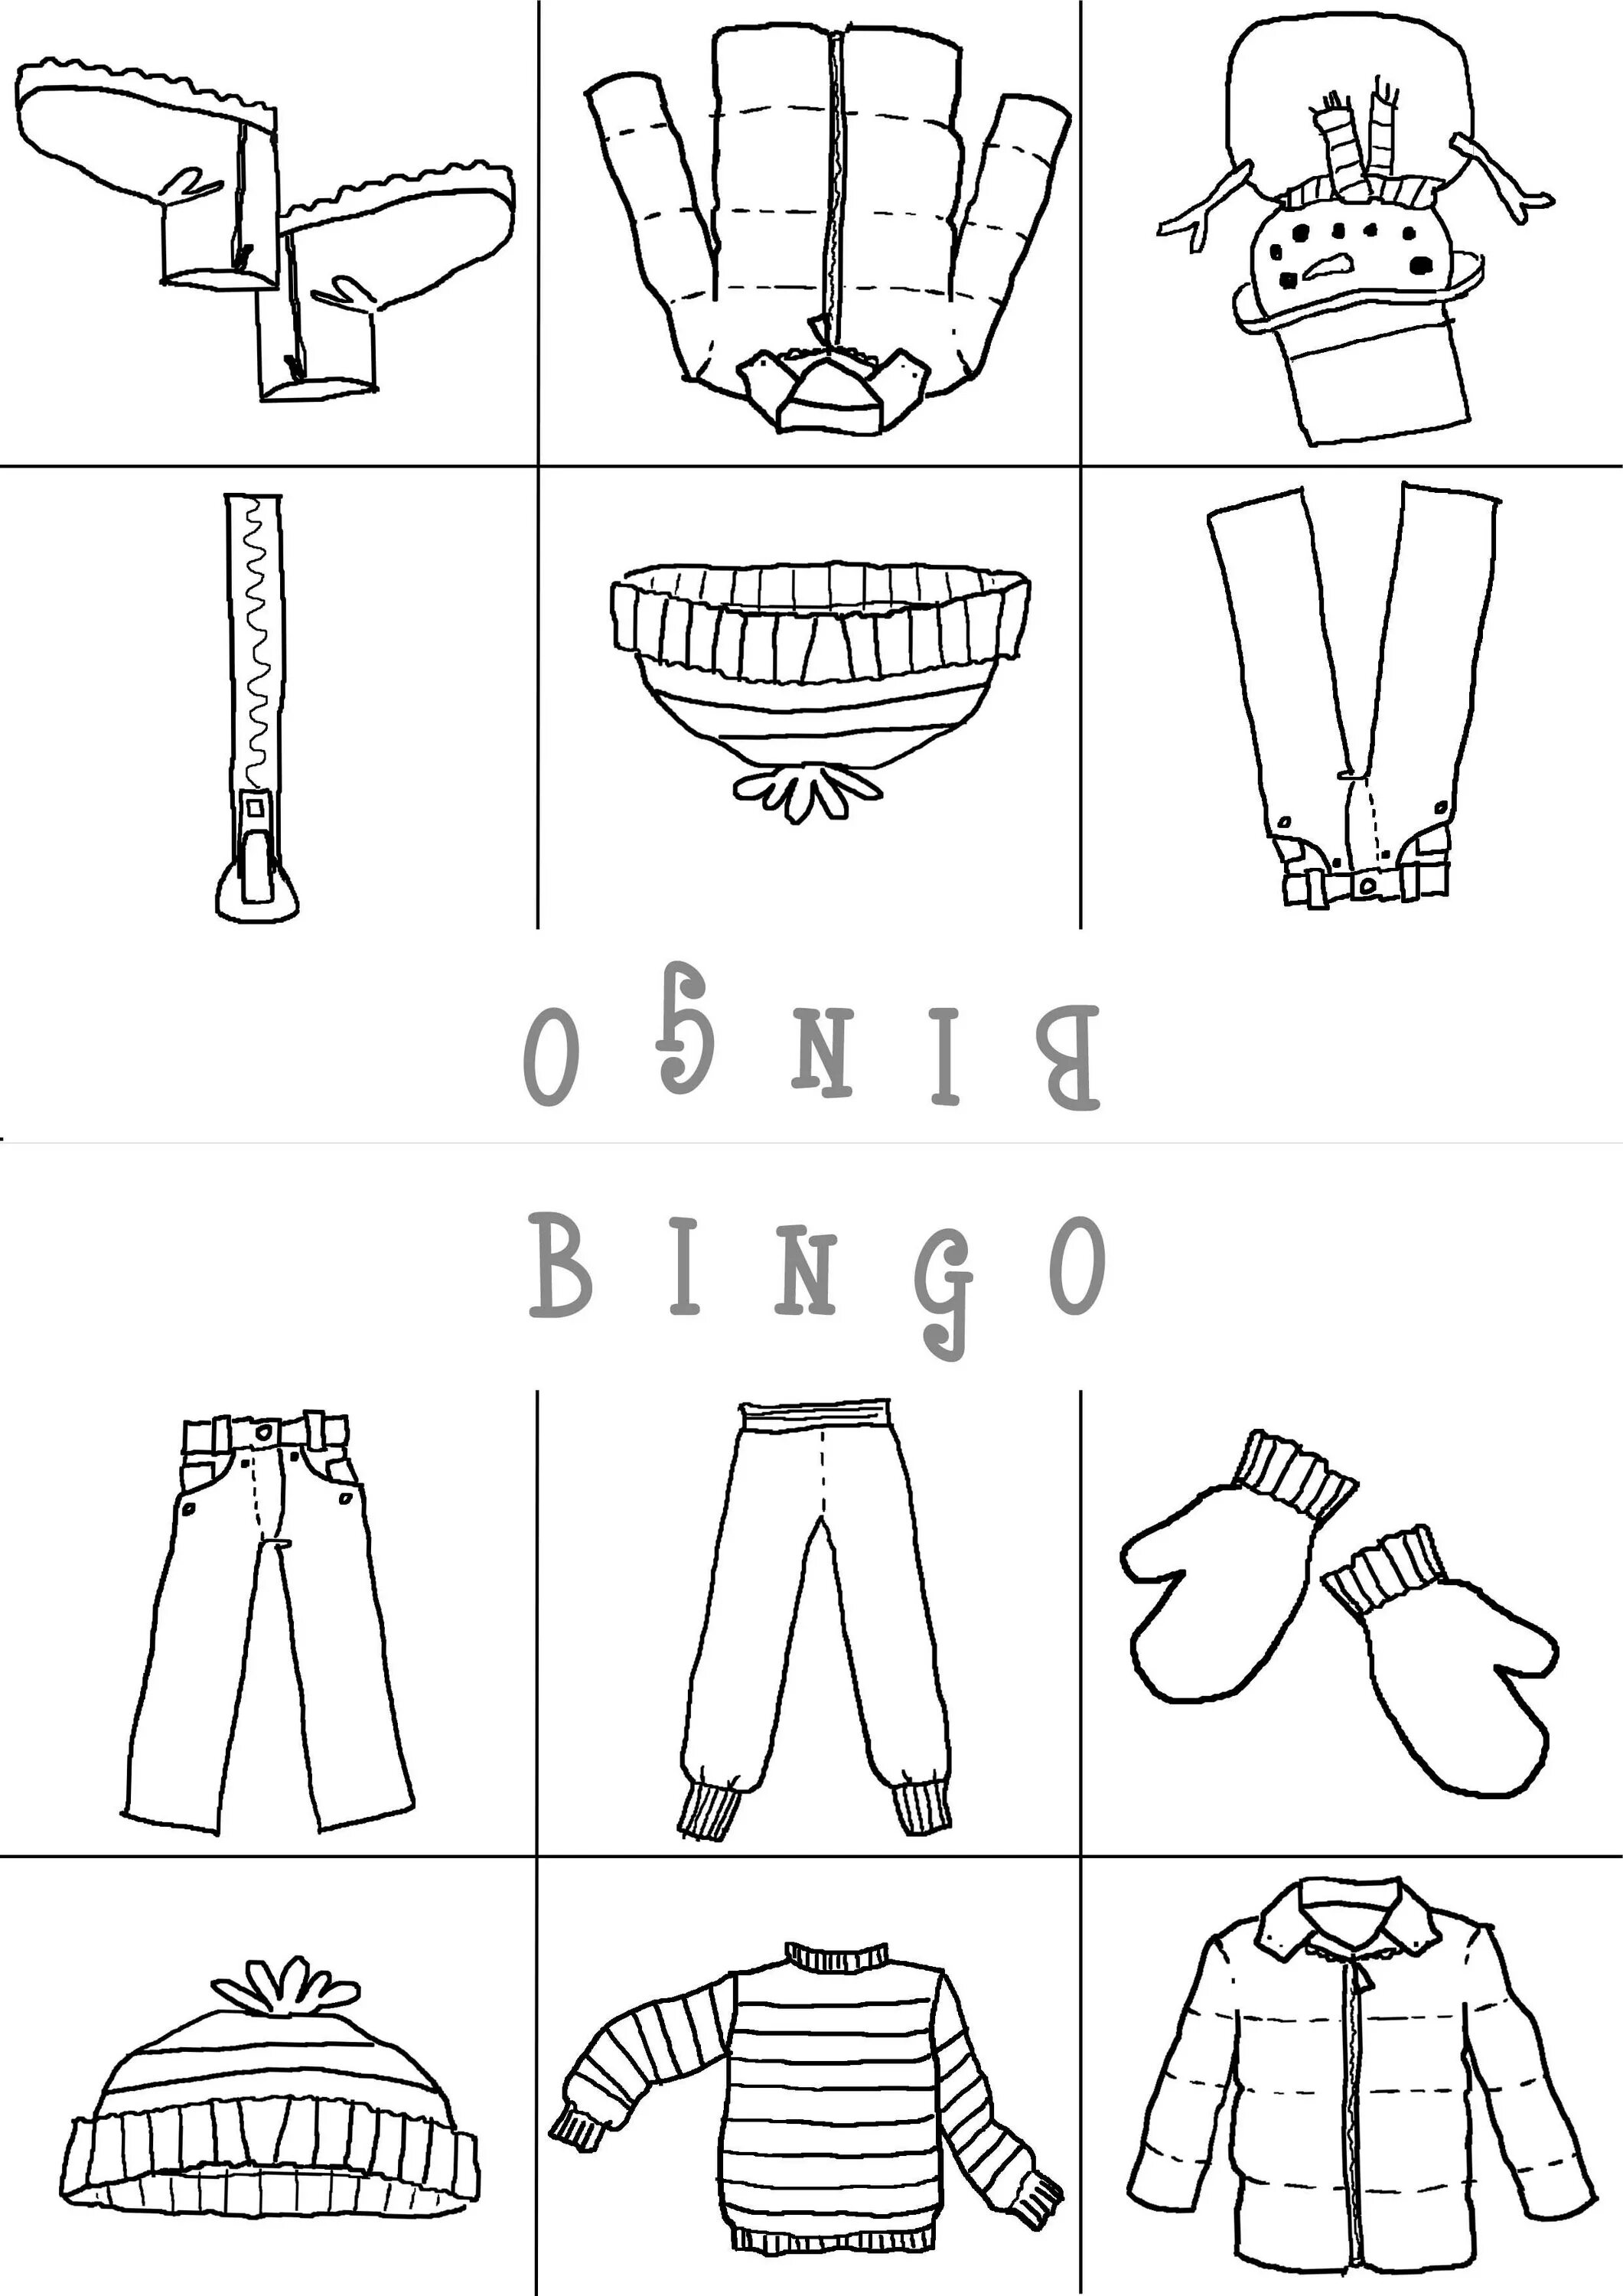 Clothes worksheets for kids. Раскраска одежды English. Clothes Worksheets раскраска. Worksheets одежда preschoolers. Clothes activities for Kids.